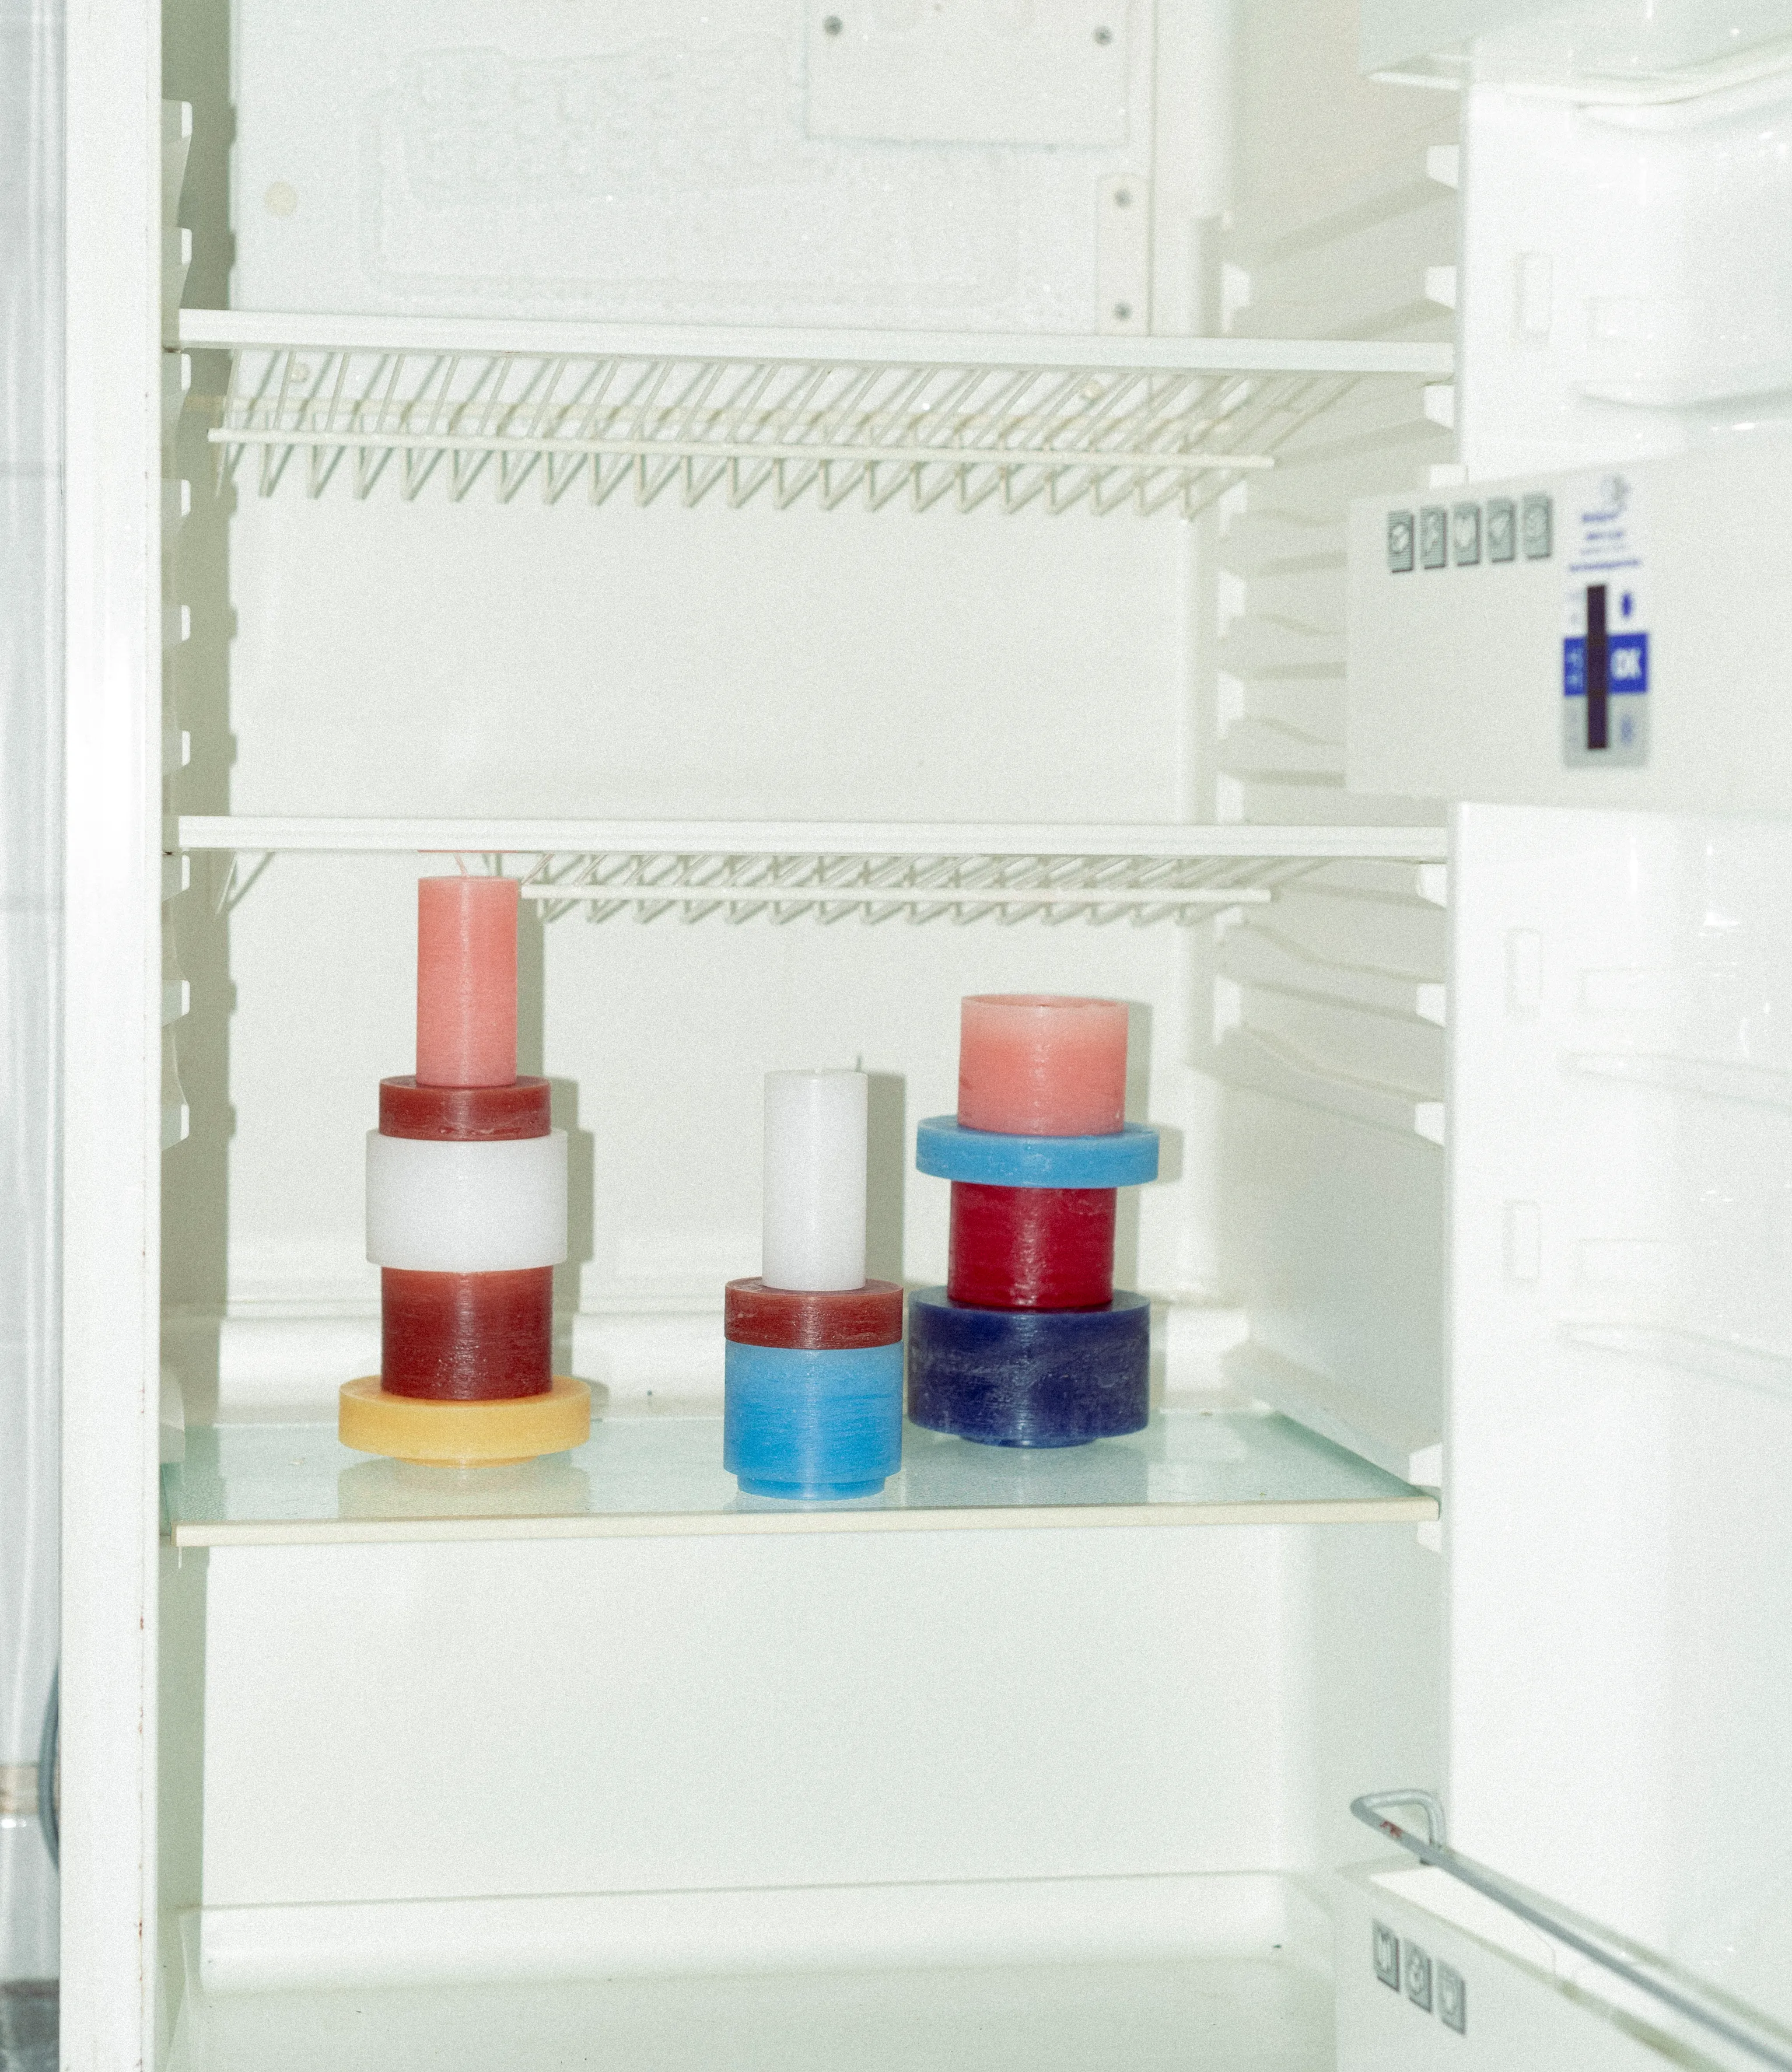 Stackable Candles of Stan Editions showcased in a retro fridge.